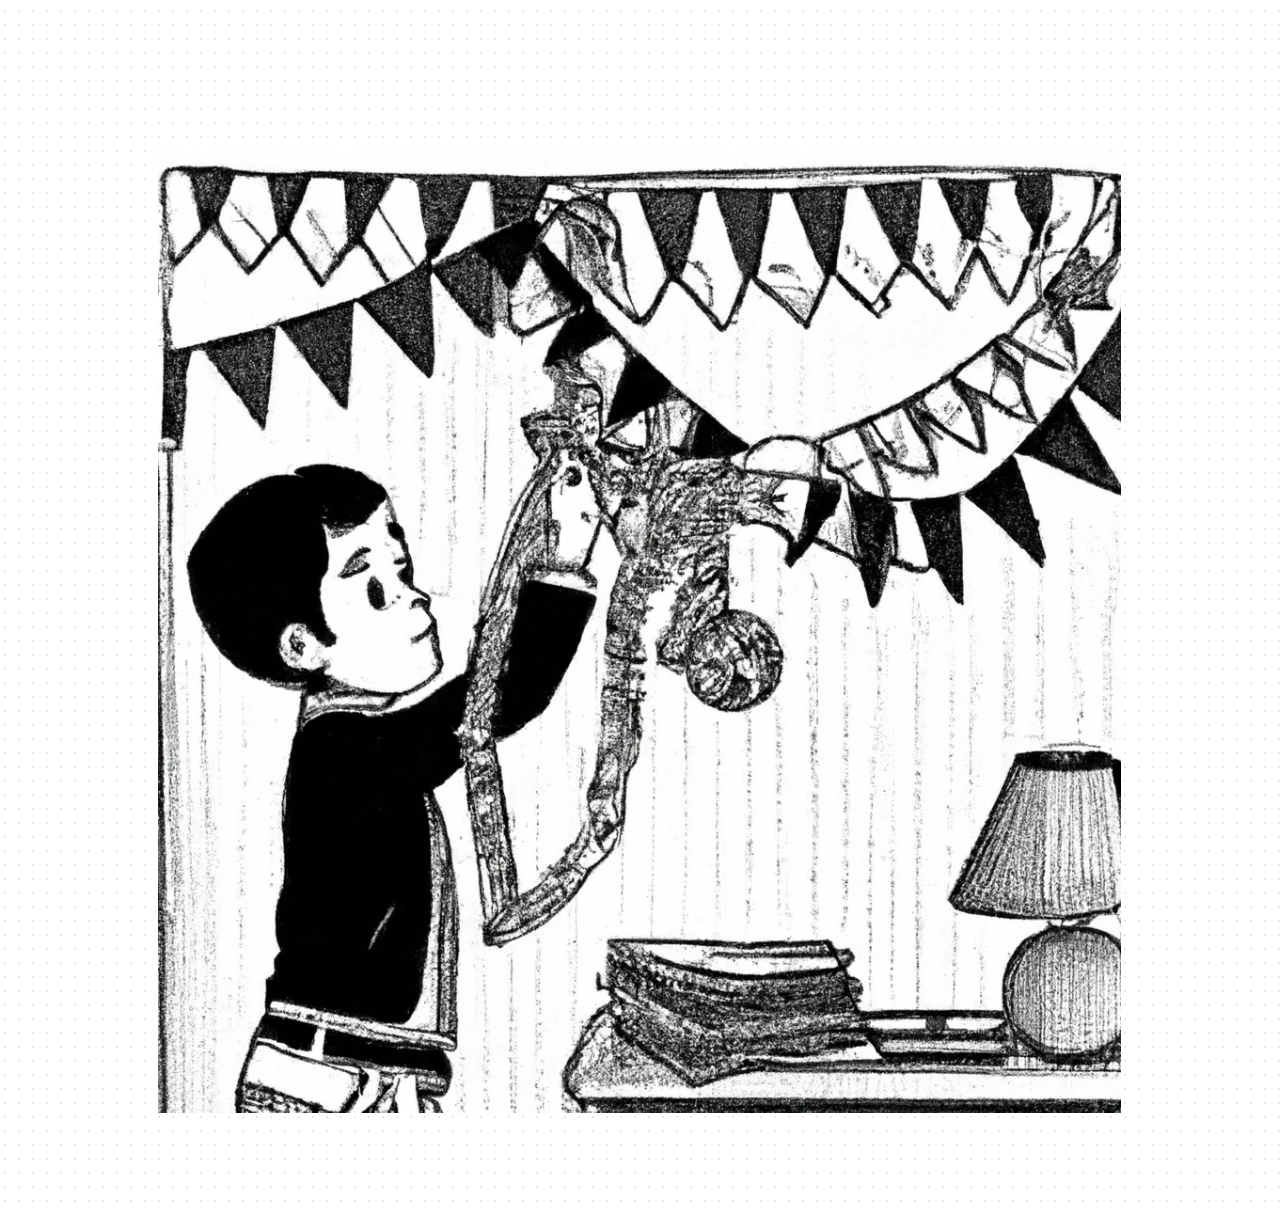 Dall-e2 Query: hatching style, boy putting up party decorations, black and white